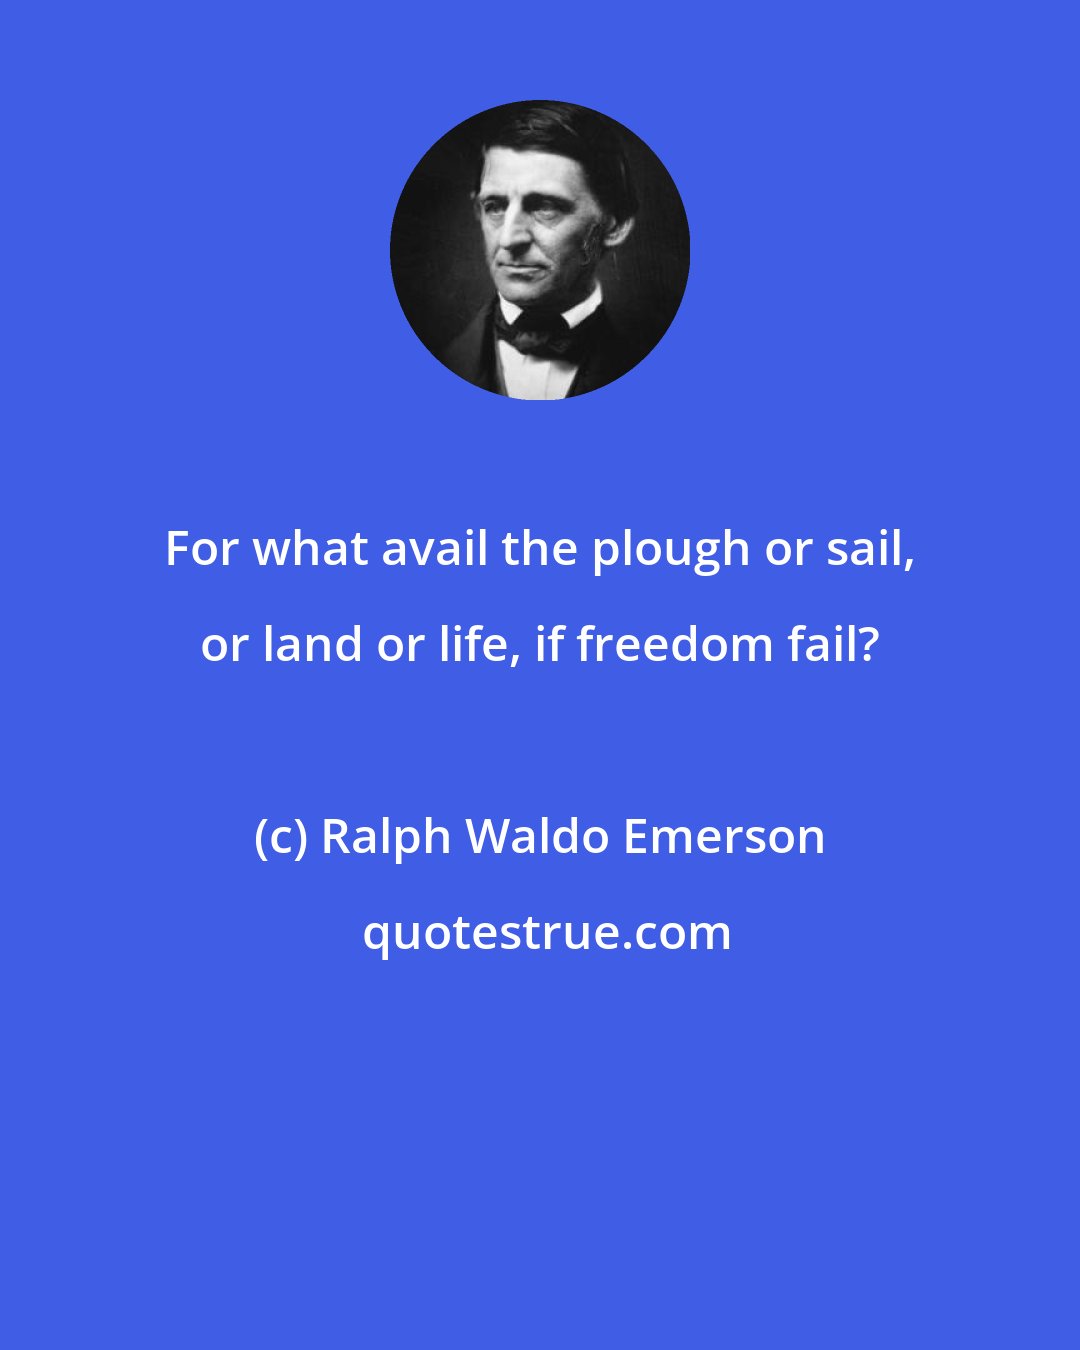 Ralph Waldo Emerson: For what avail the plough or sail, or land or life, if freedom fail?